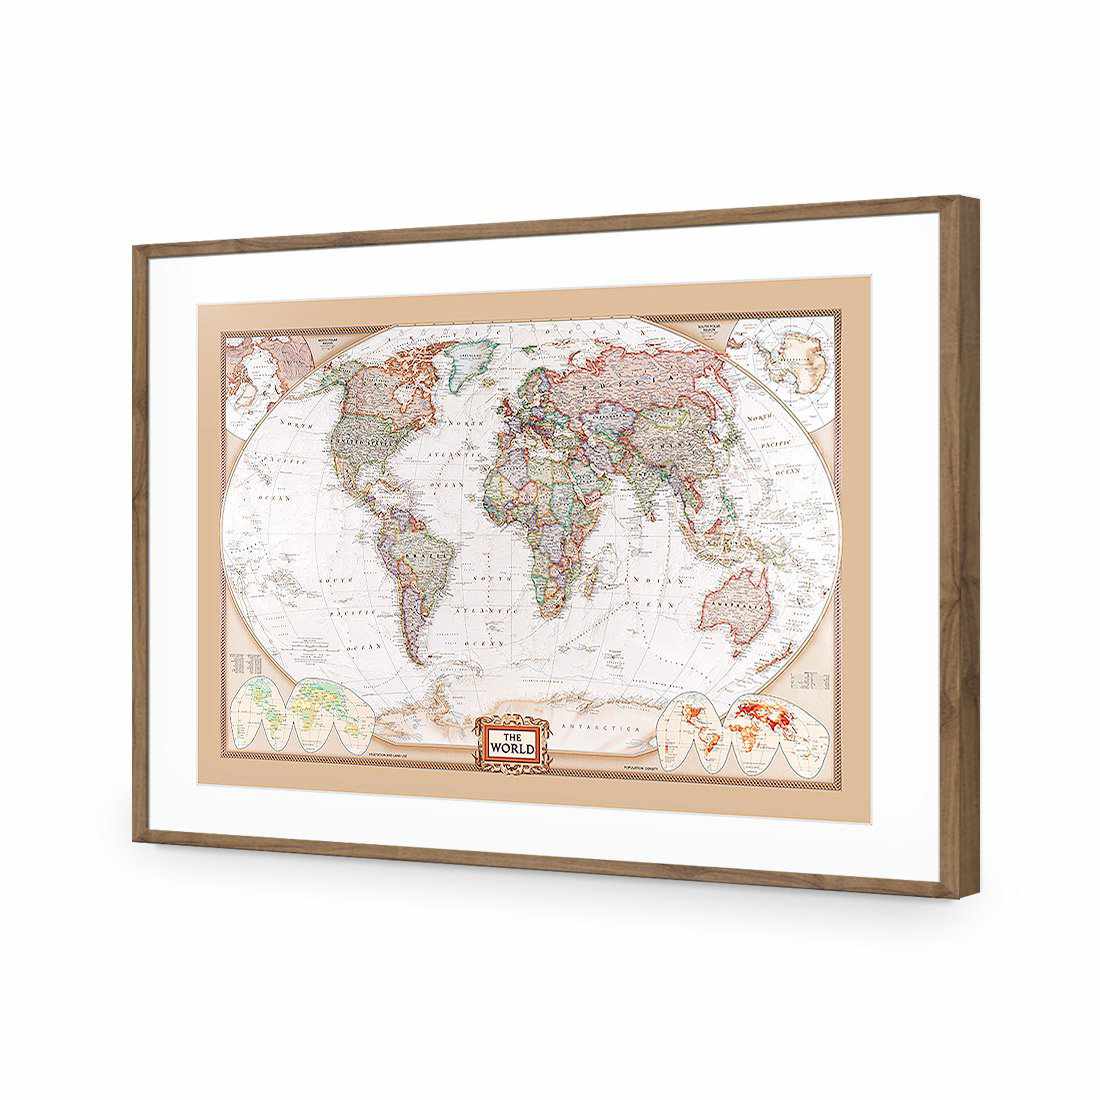 The World Map-Acrylic-Wall Art Design-With Border-Acrylic - Natural Frame-45x30cm-Wall Art Designs